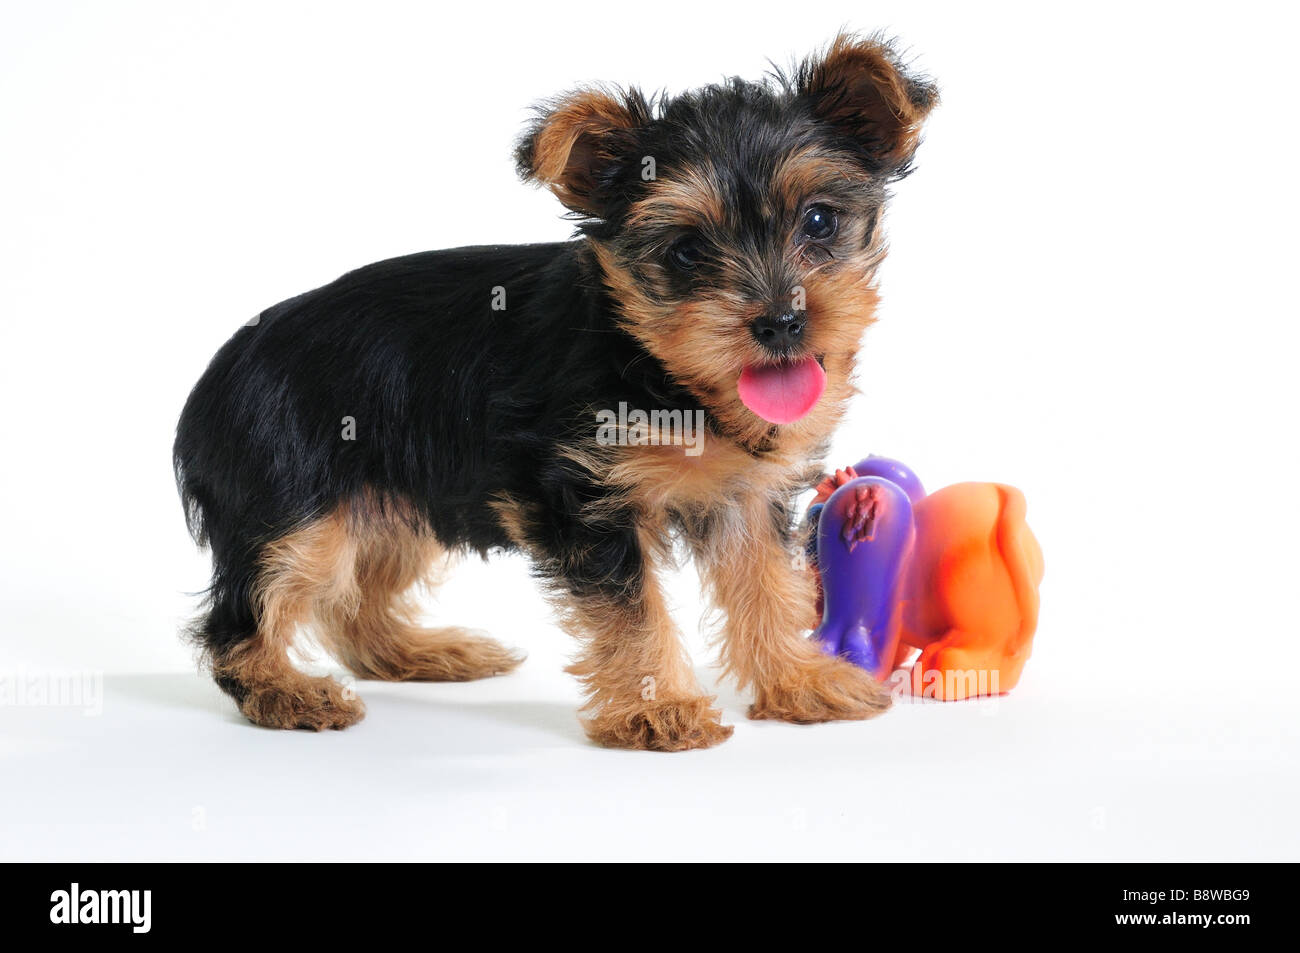 A 7 week old Yorkshire Terrier puppy, Canis lupus familiaris. Stock Photo